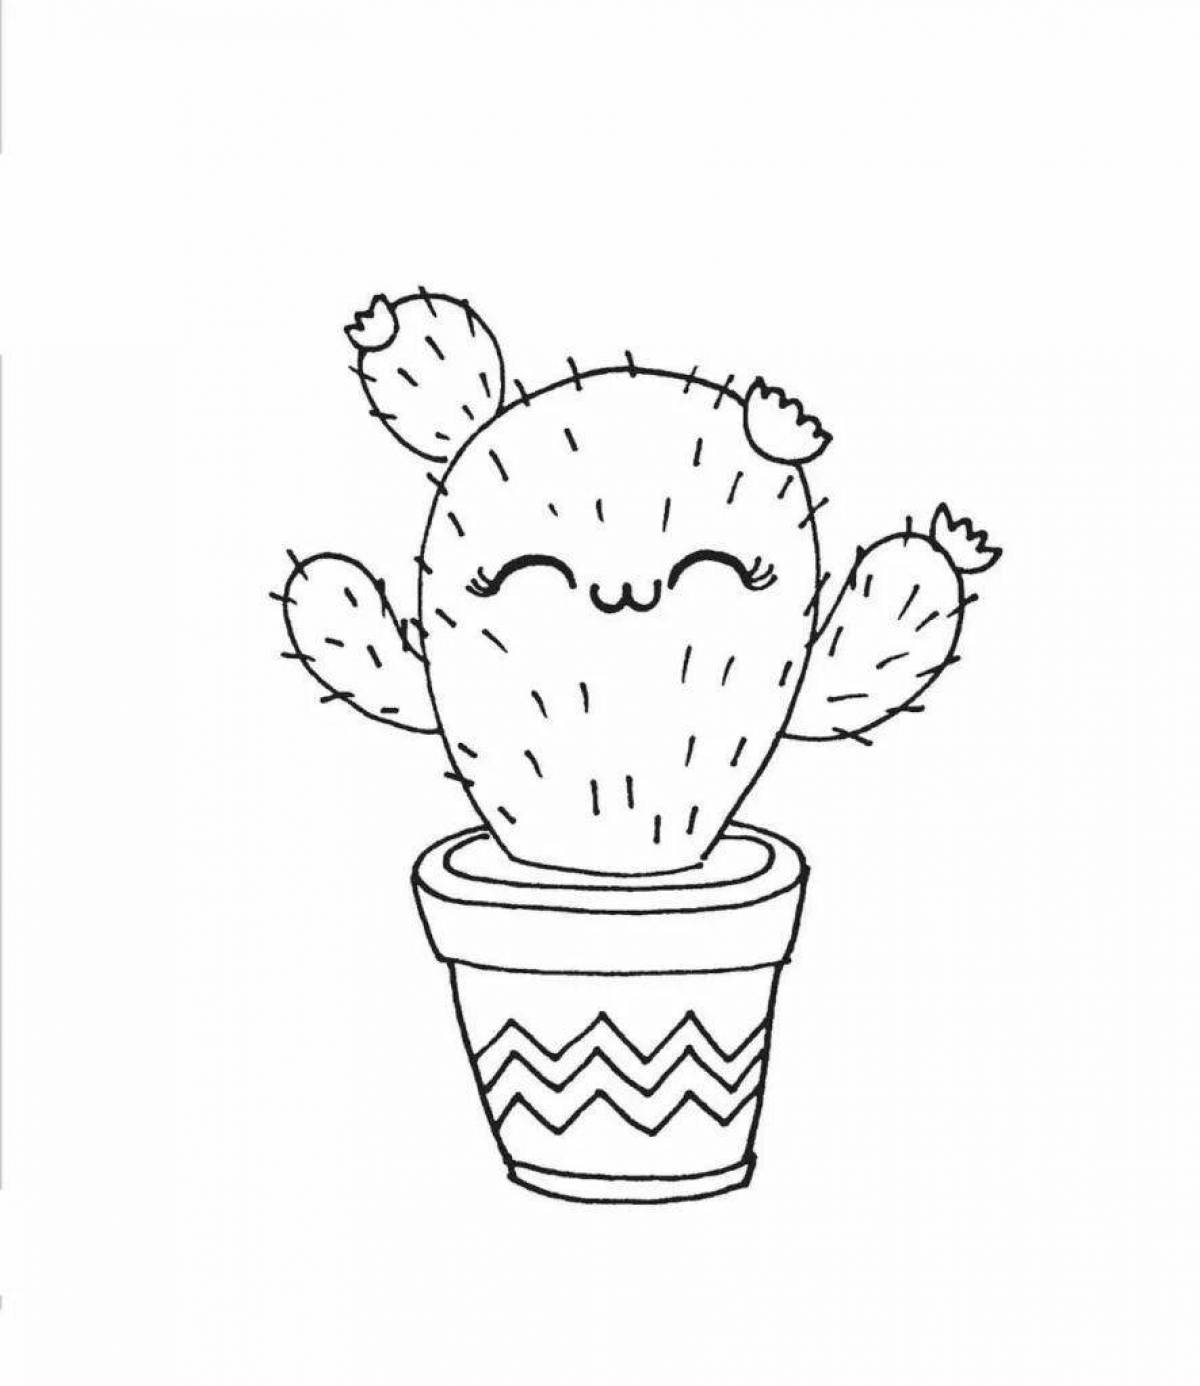 Colorful cactus coloring book